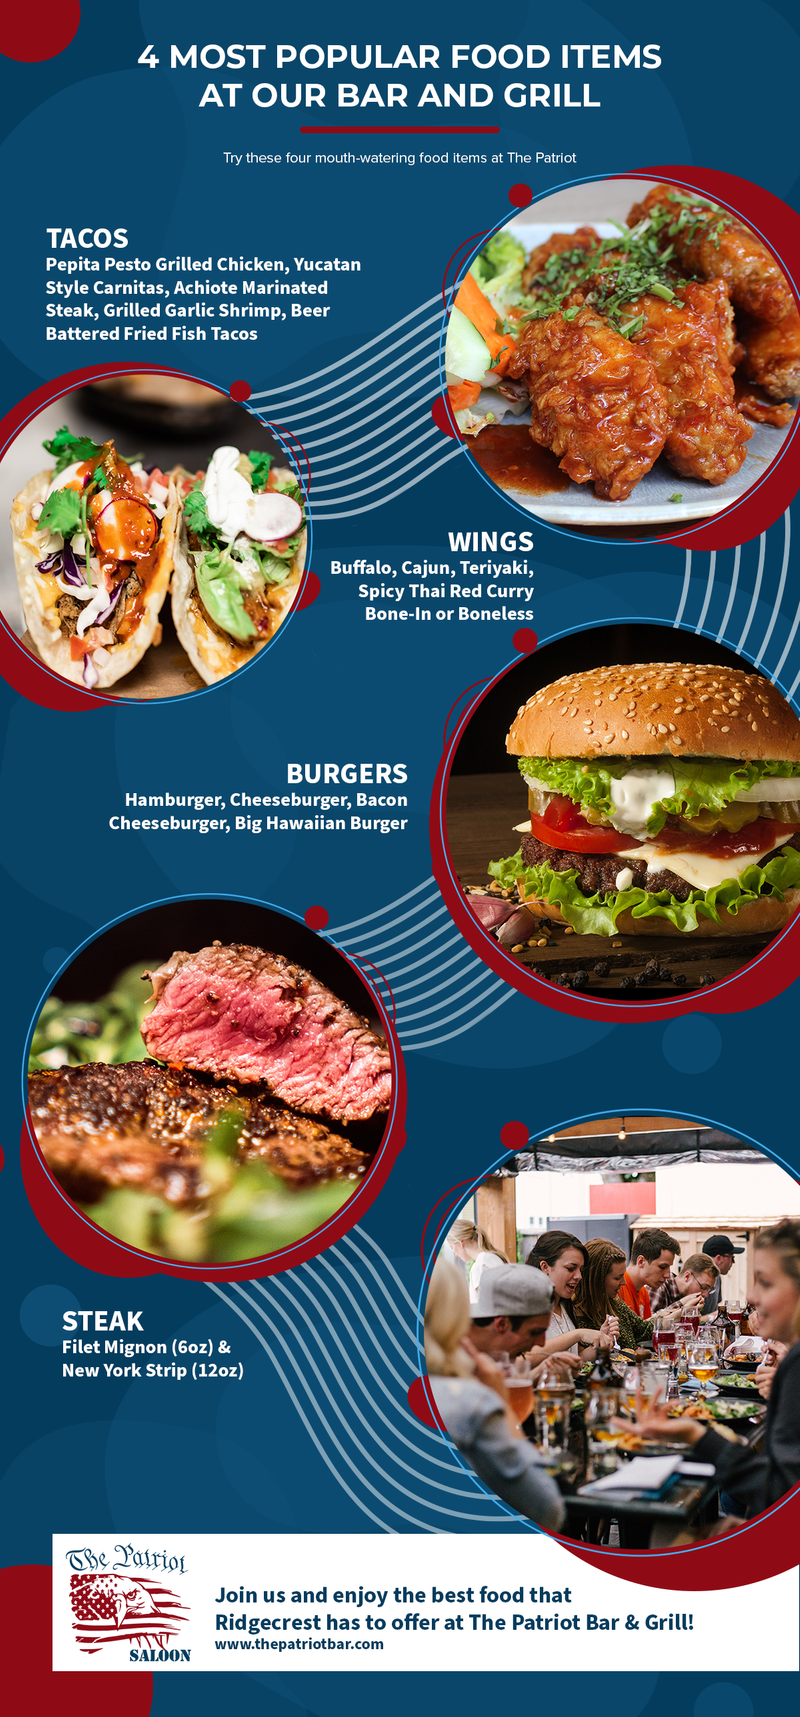 4 Most Popular Food Items at Our Bar and Grill Infographic